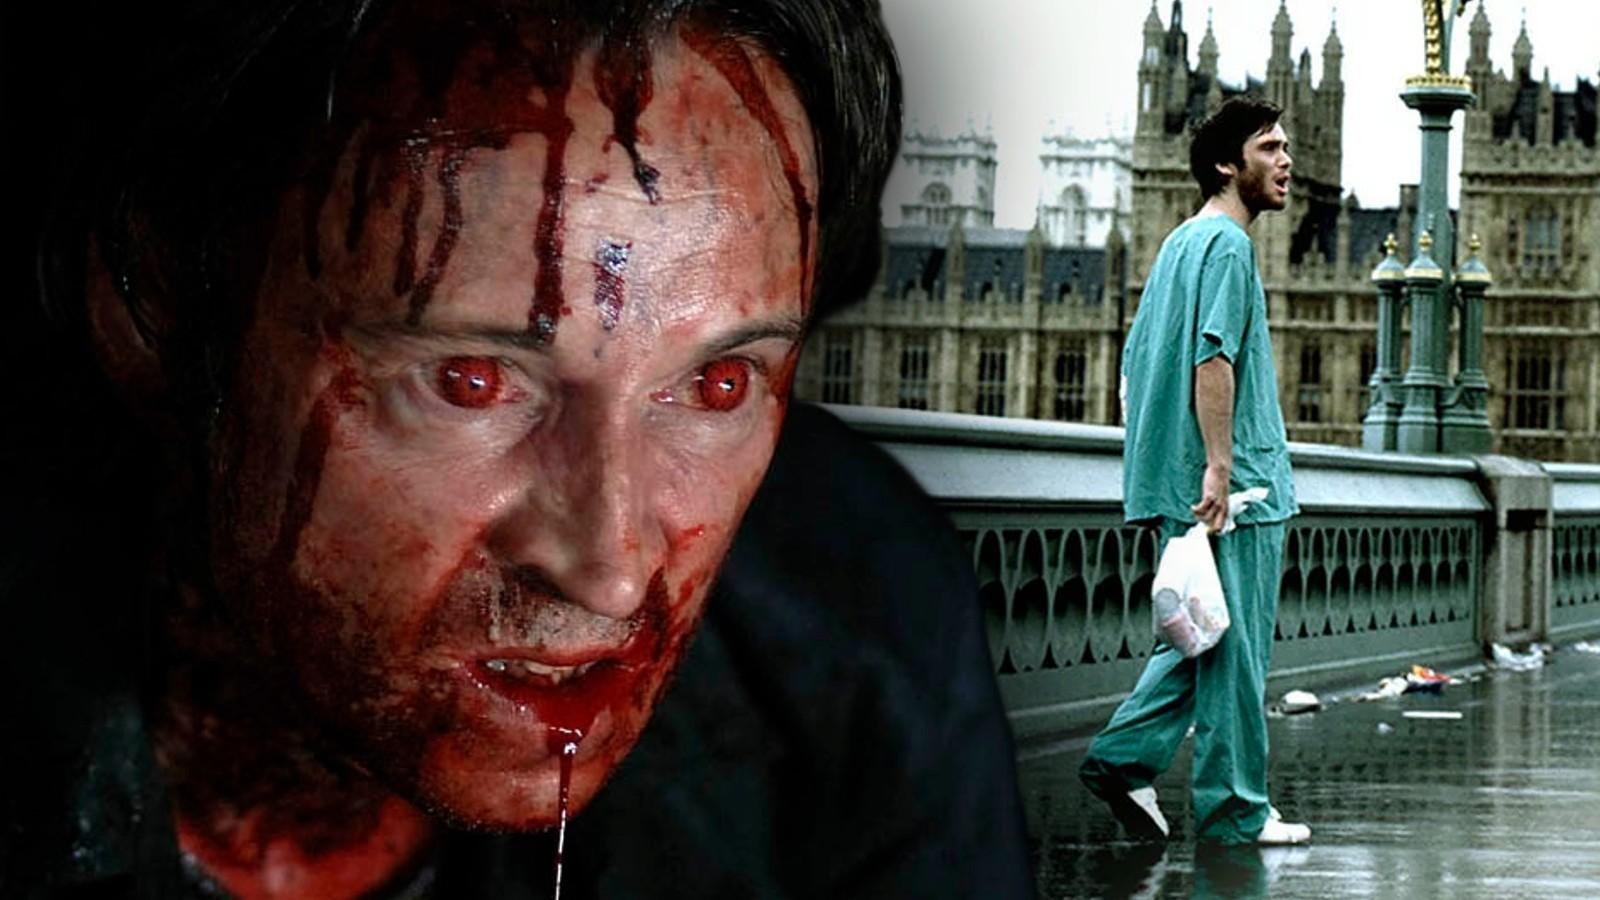 Stills from 28 Days Later and 28 Weeks Later